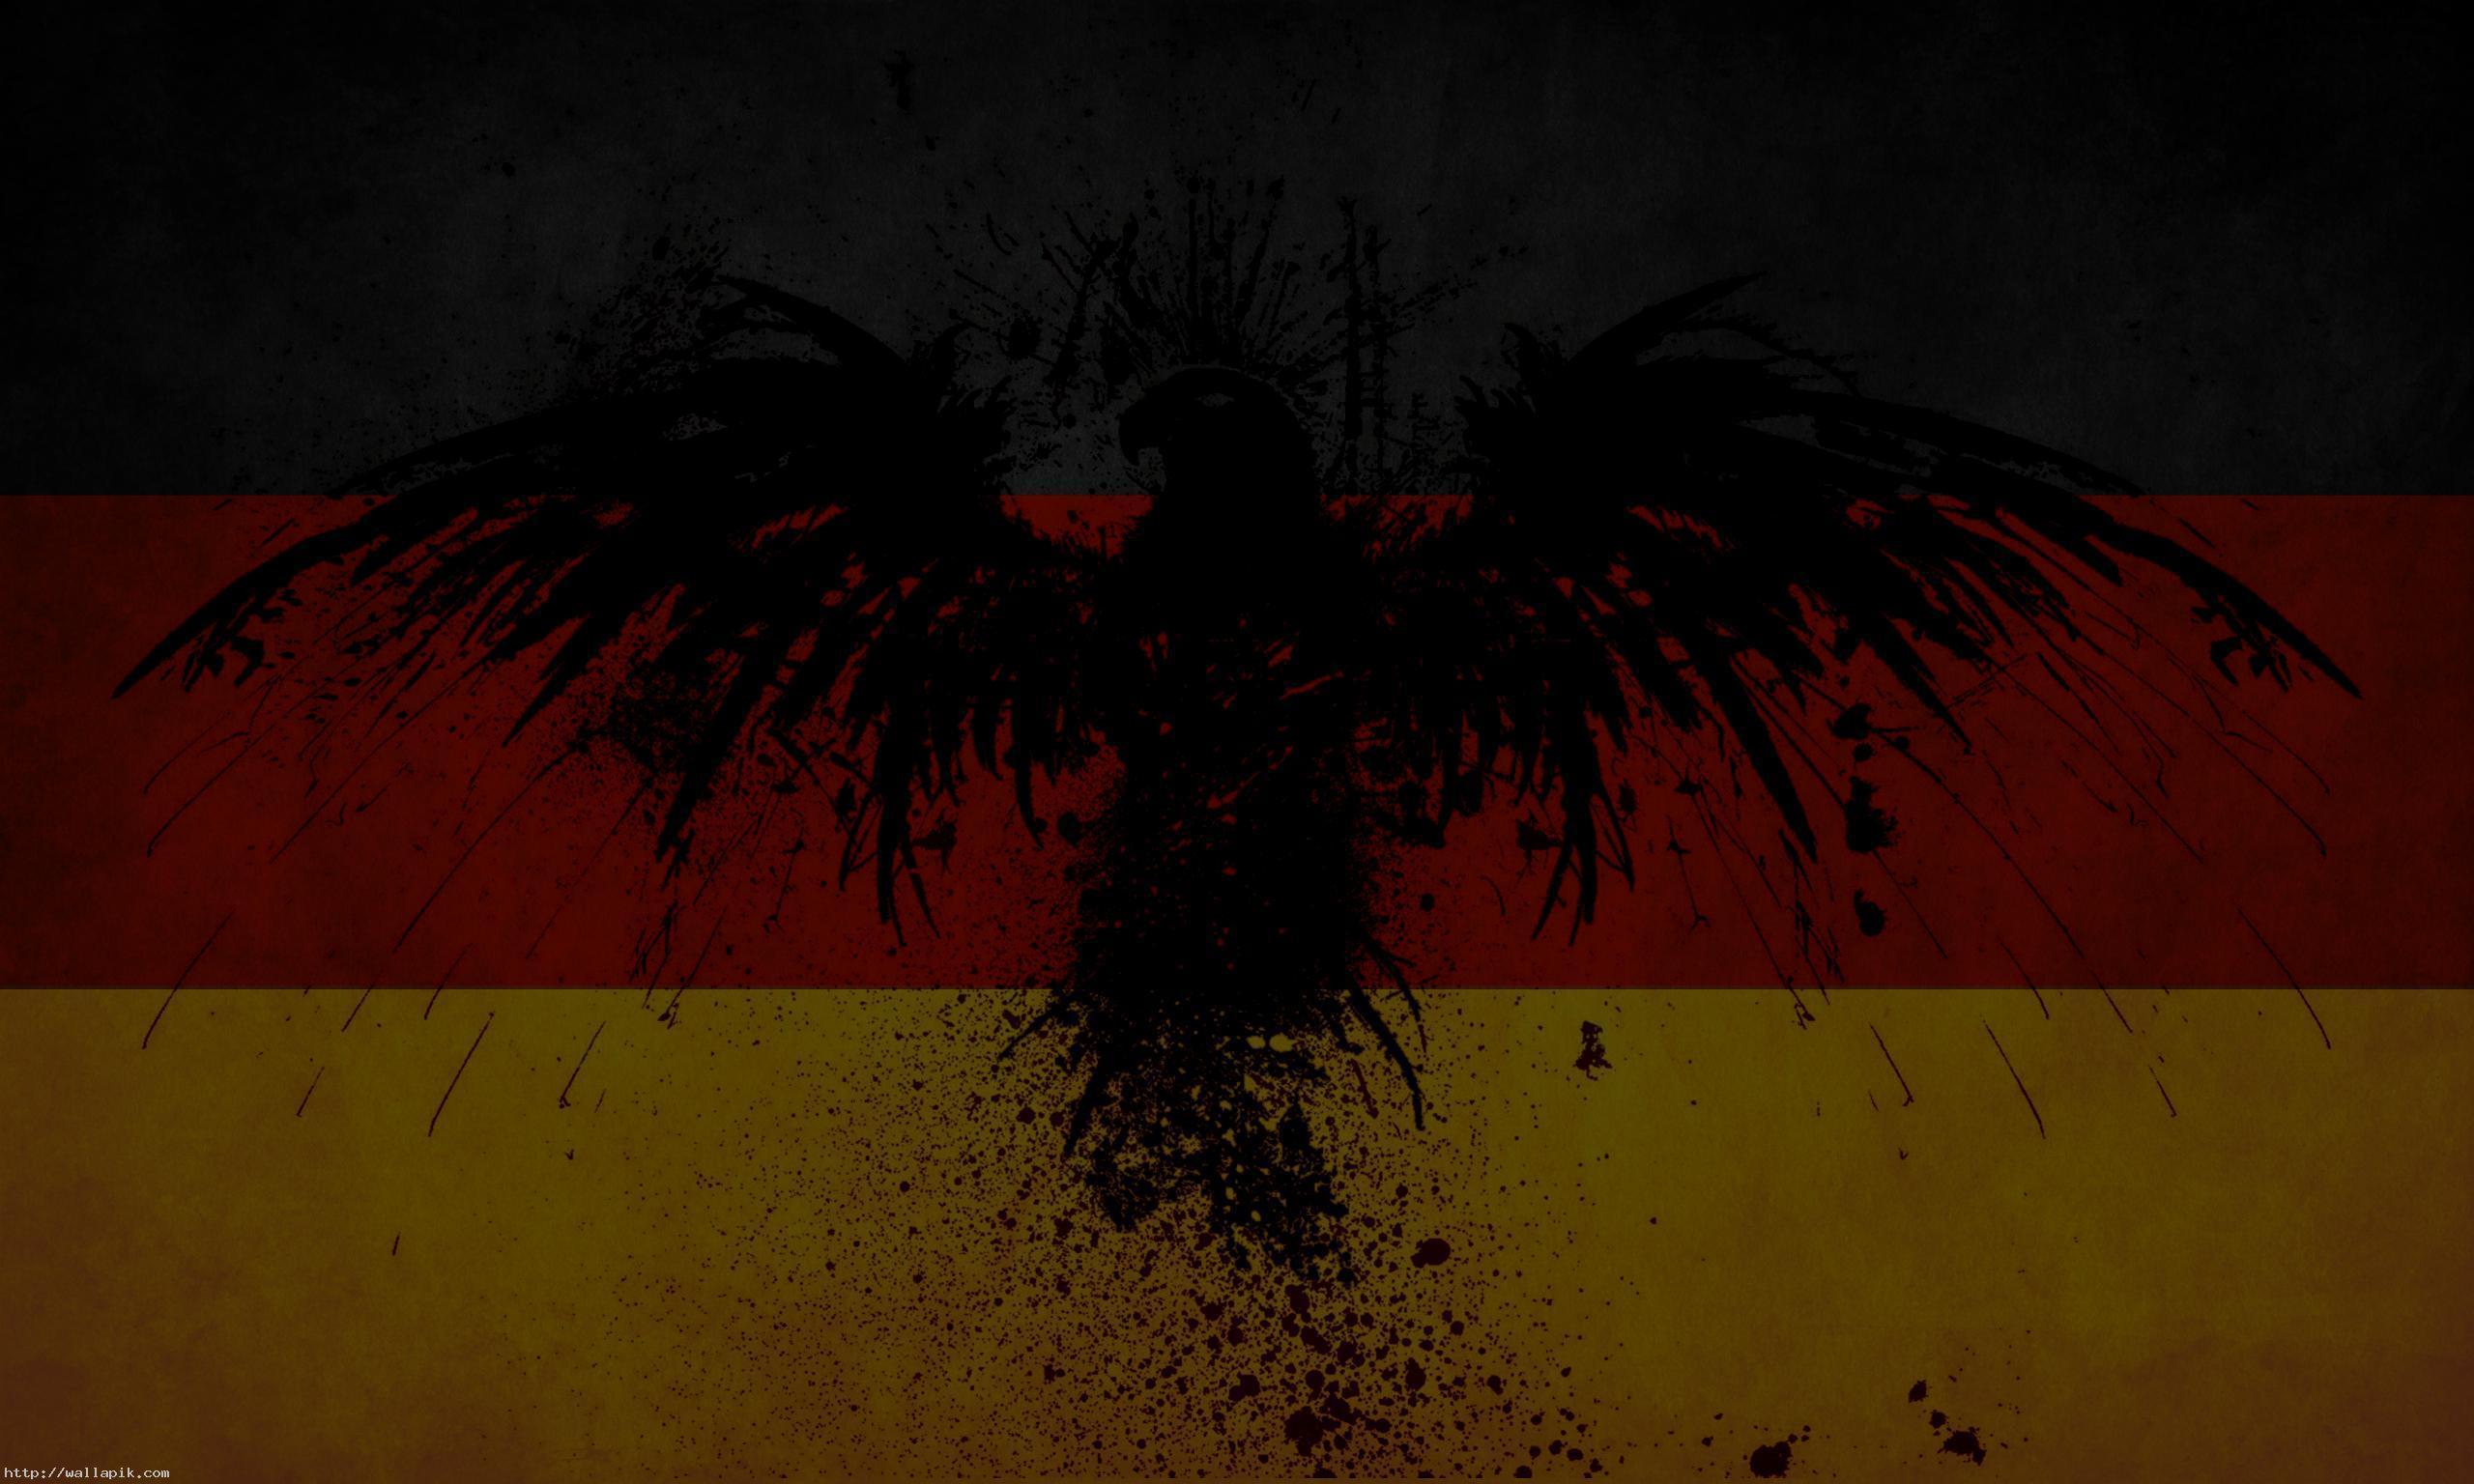 Abstract Germany Flag Art For Wallpaper 2560x1536 px Free Download